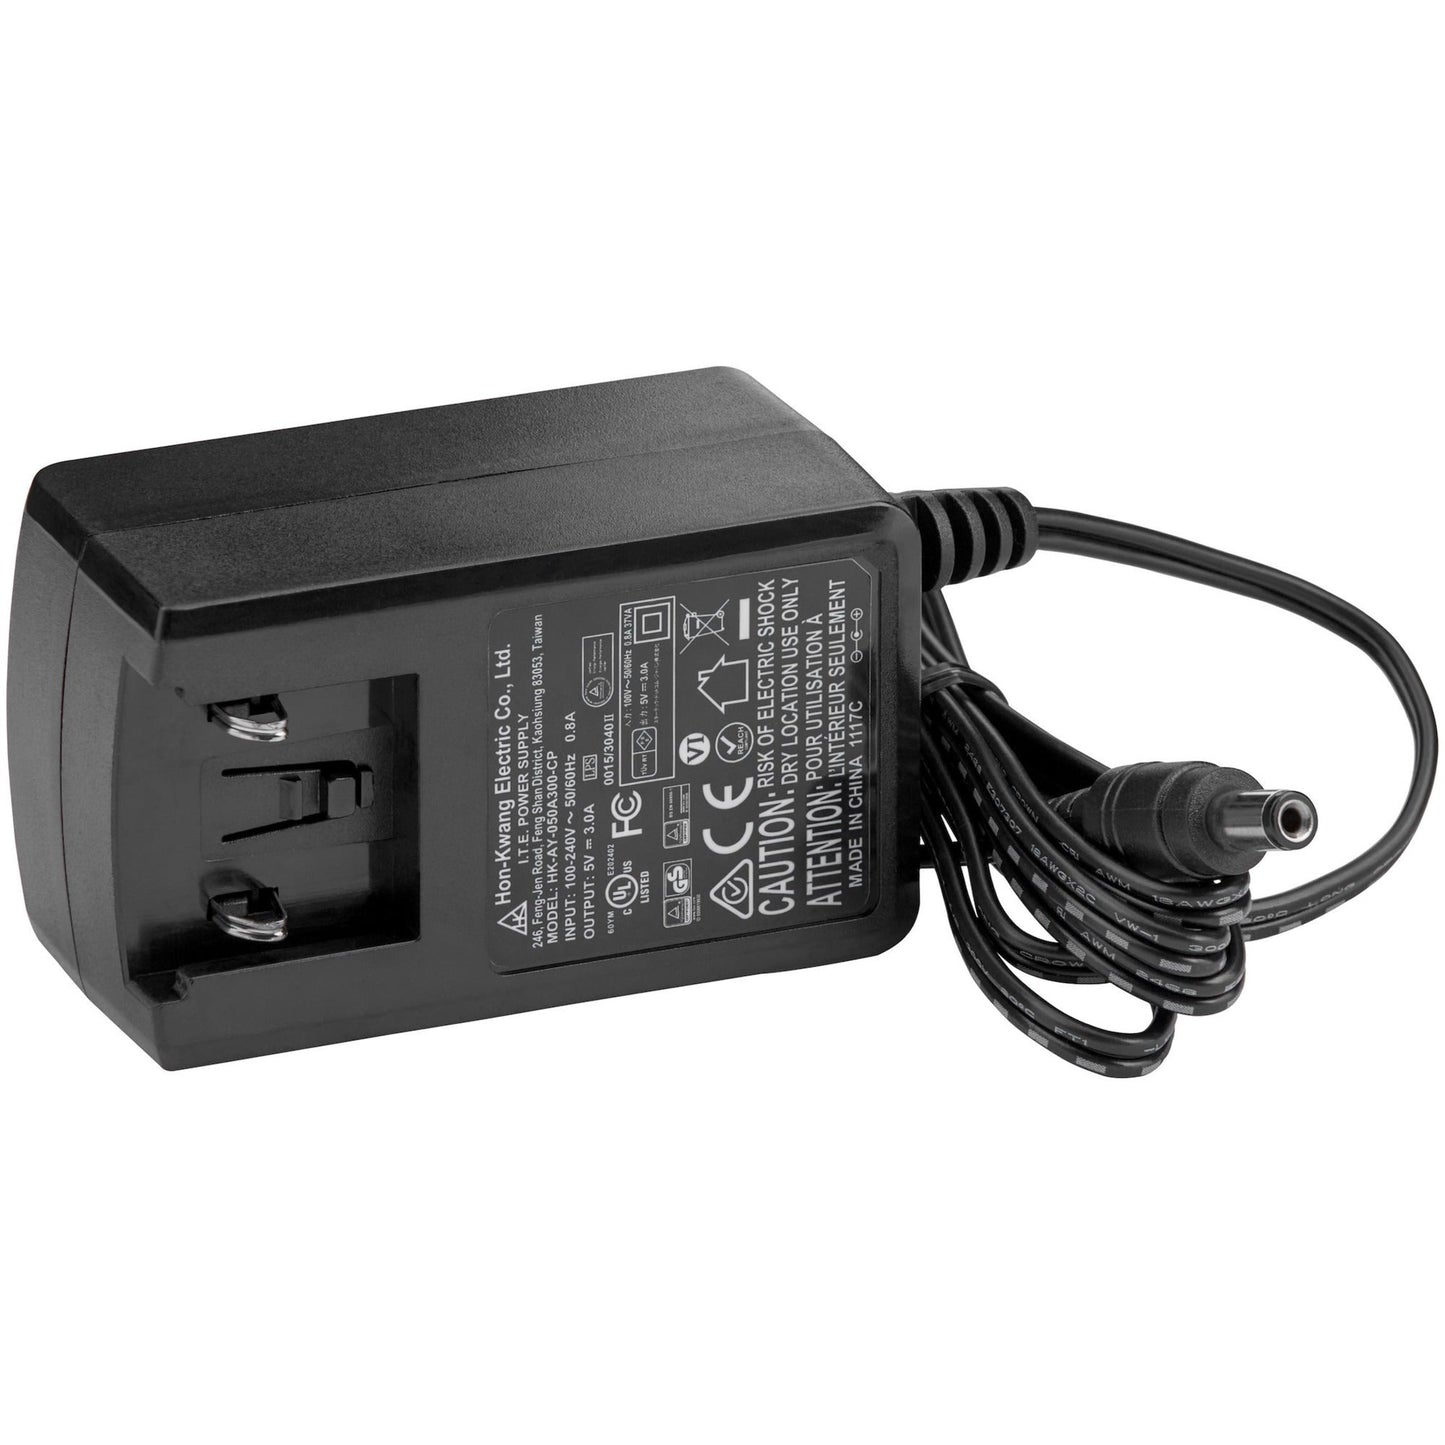 StarTech.com Replacement 5V DC Power Adapter - 5 Volts 3 Amps